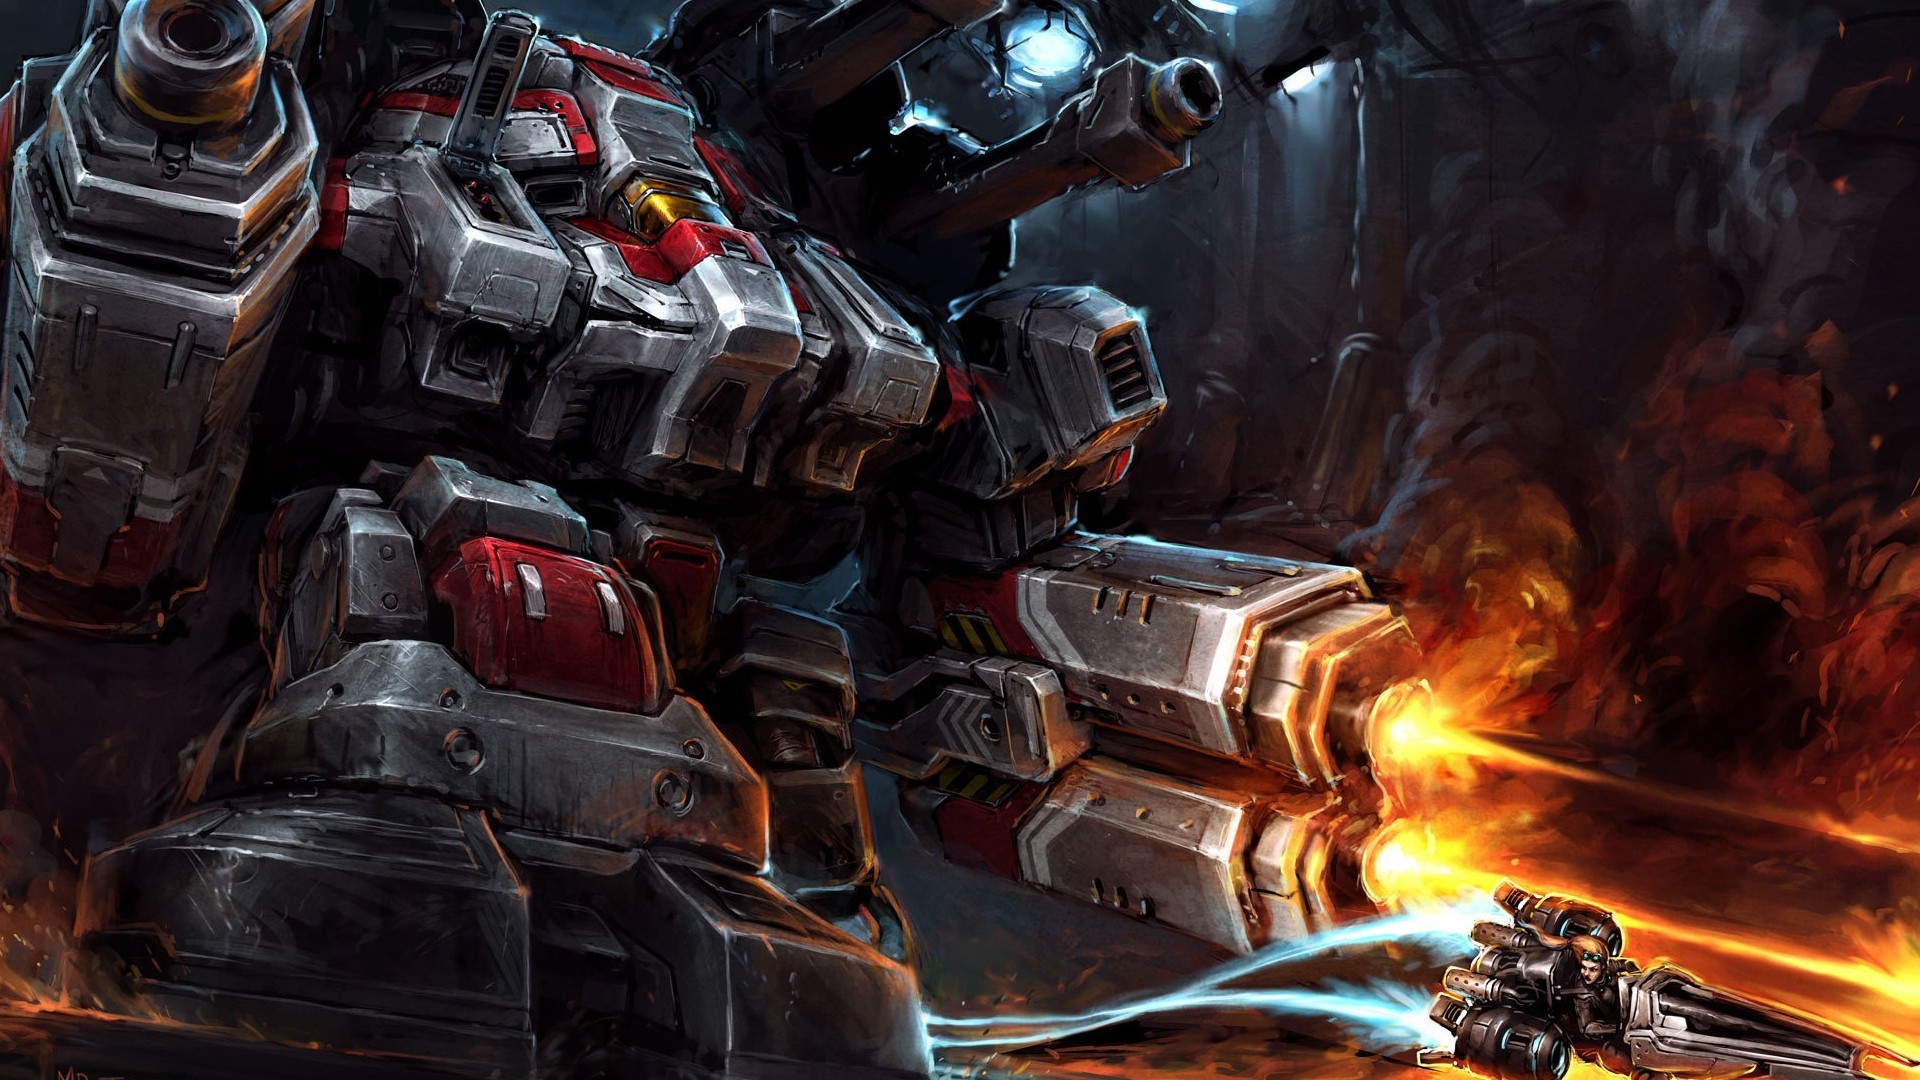 1920x1080 Full HD Wallpaper thor starcraft 2 robot volley giant .